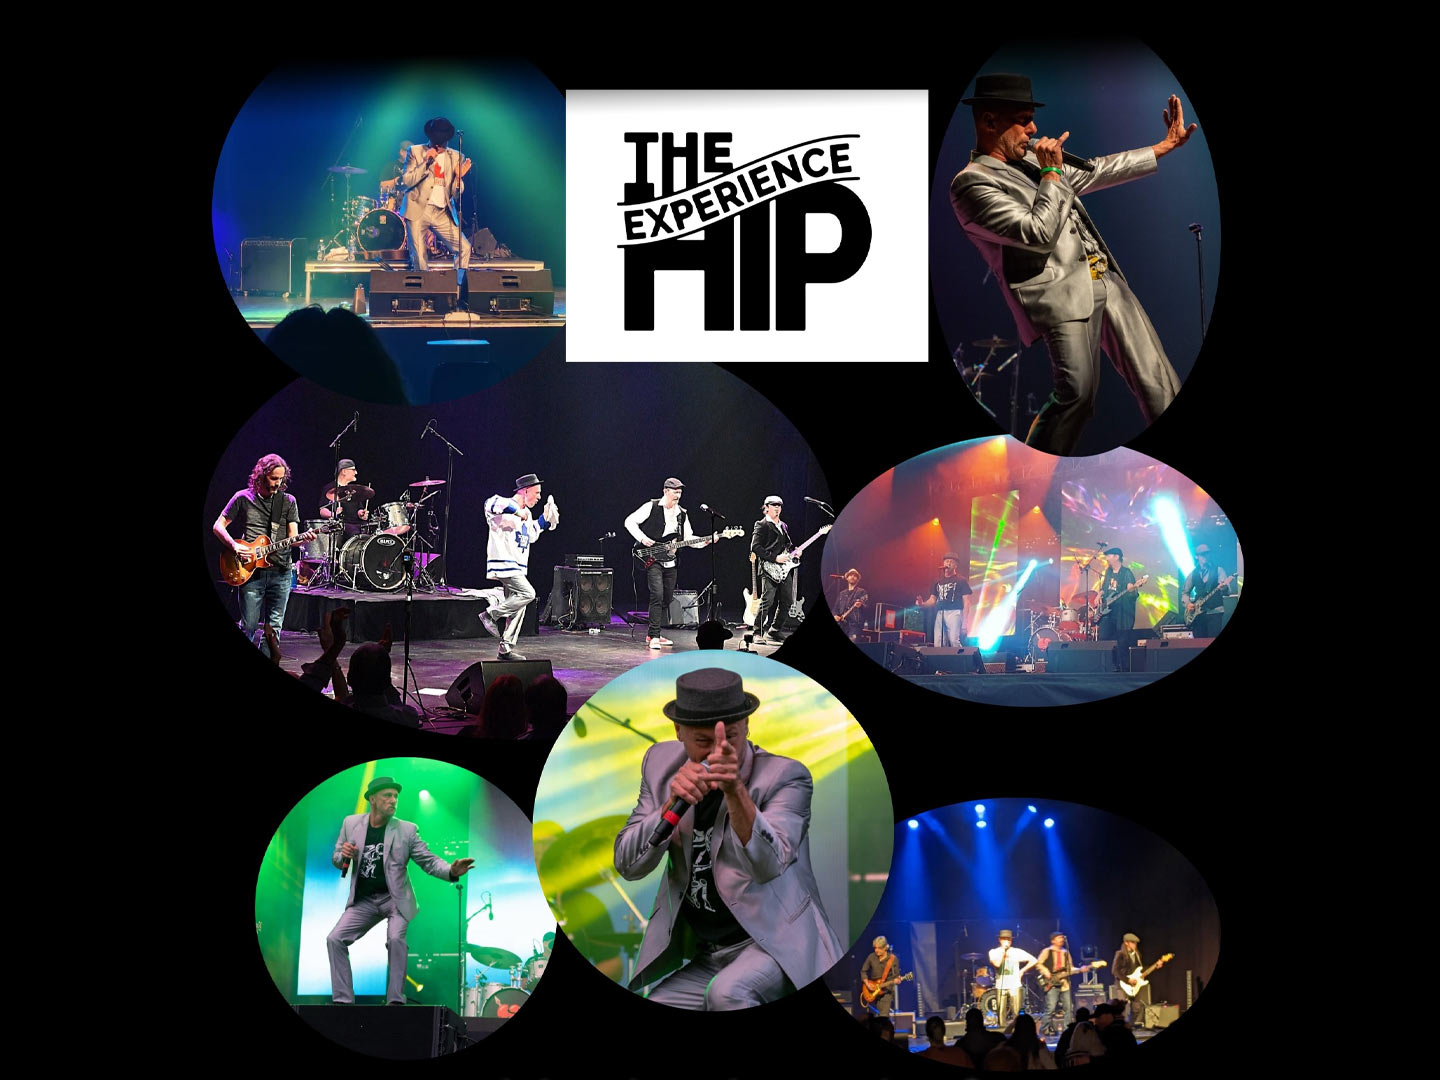 Epic Live Concerts presents The Hip Experience